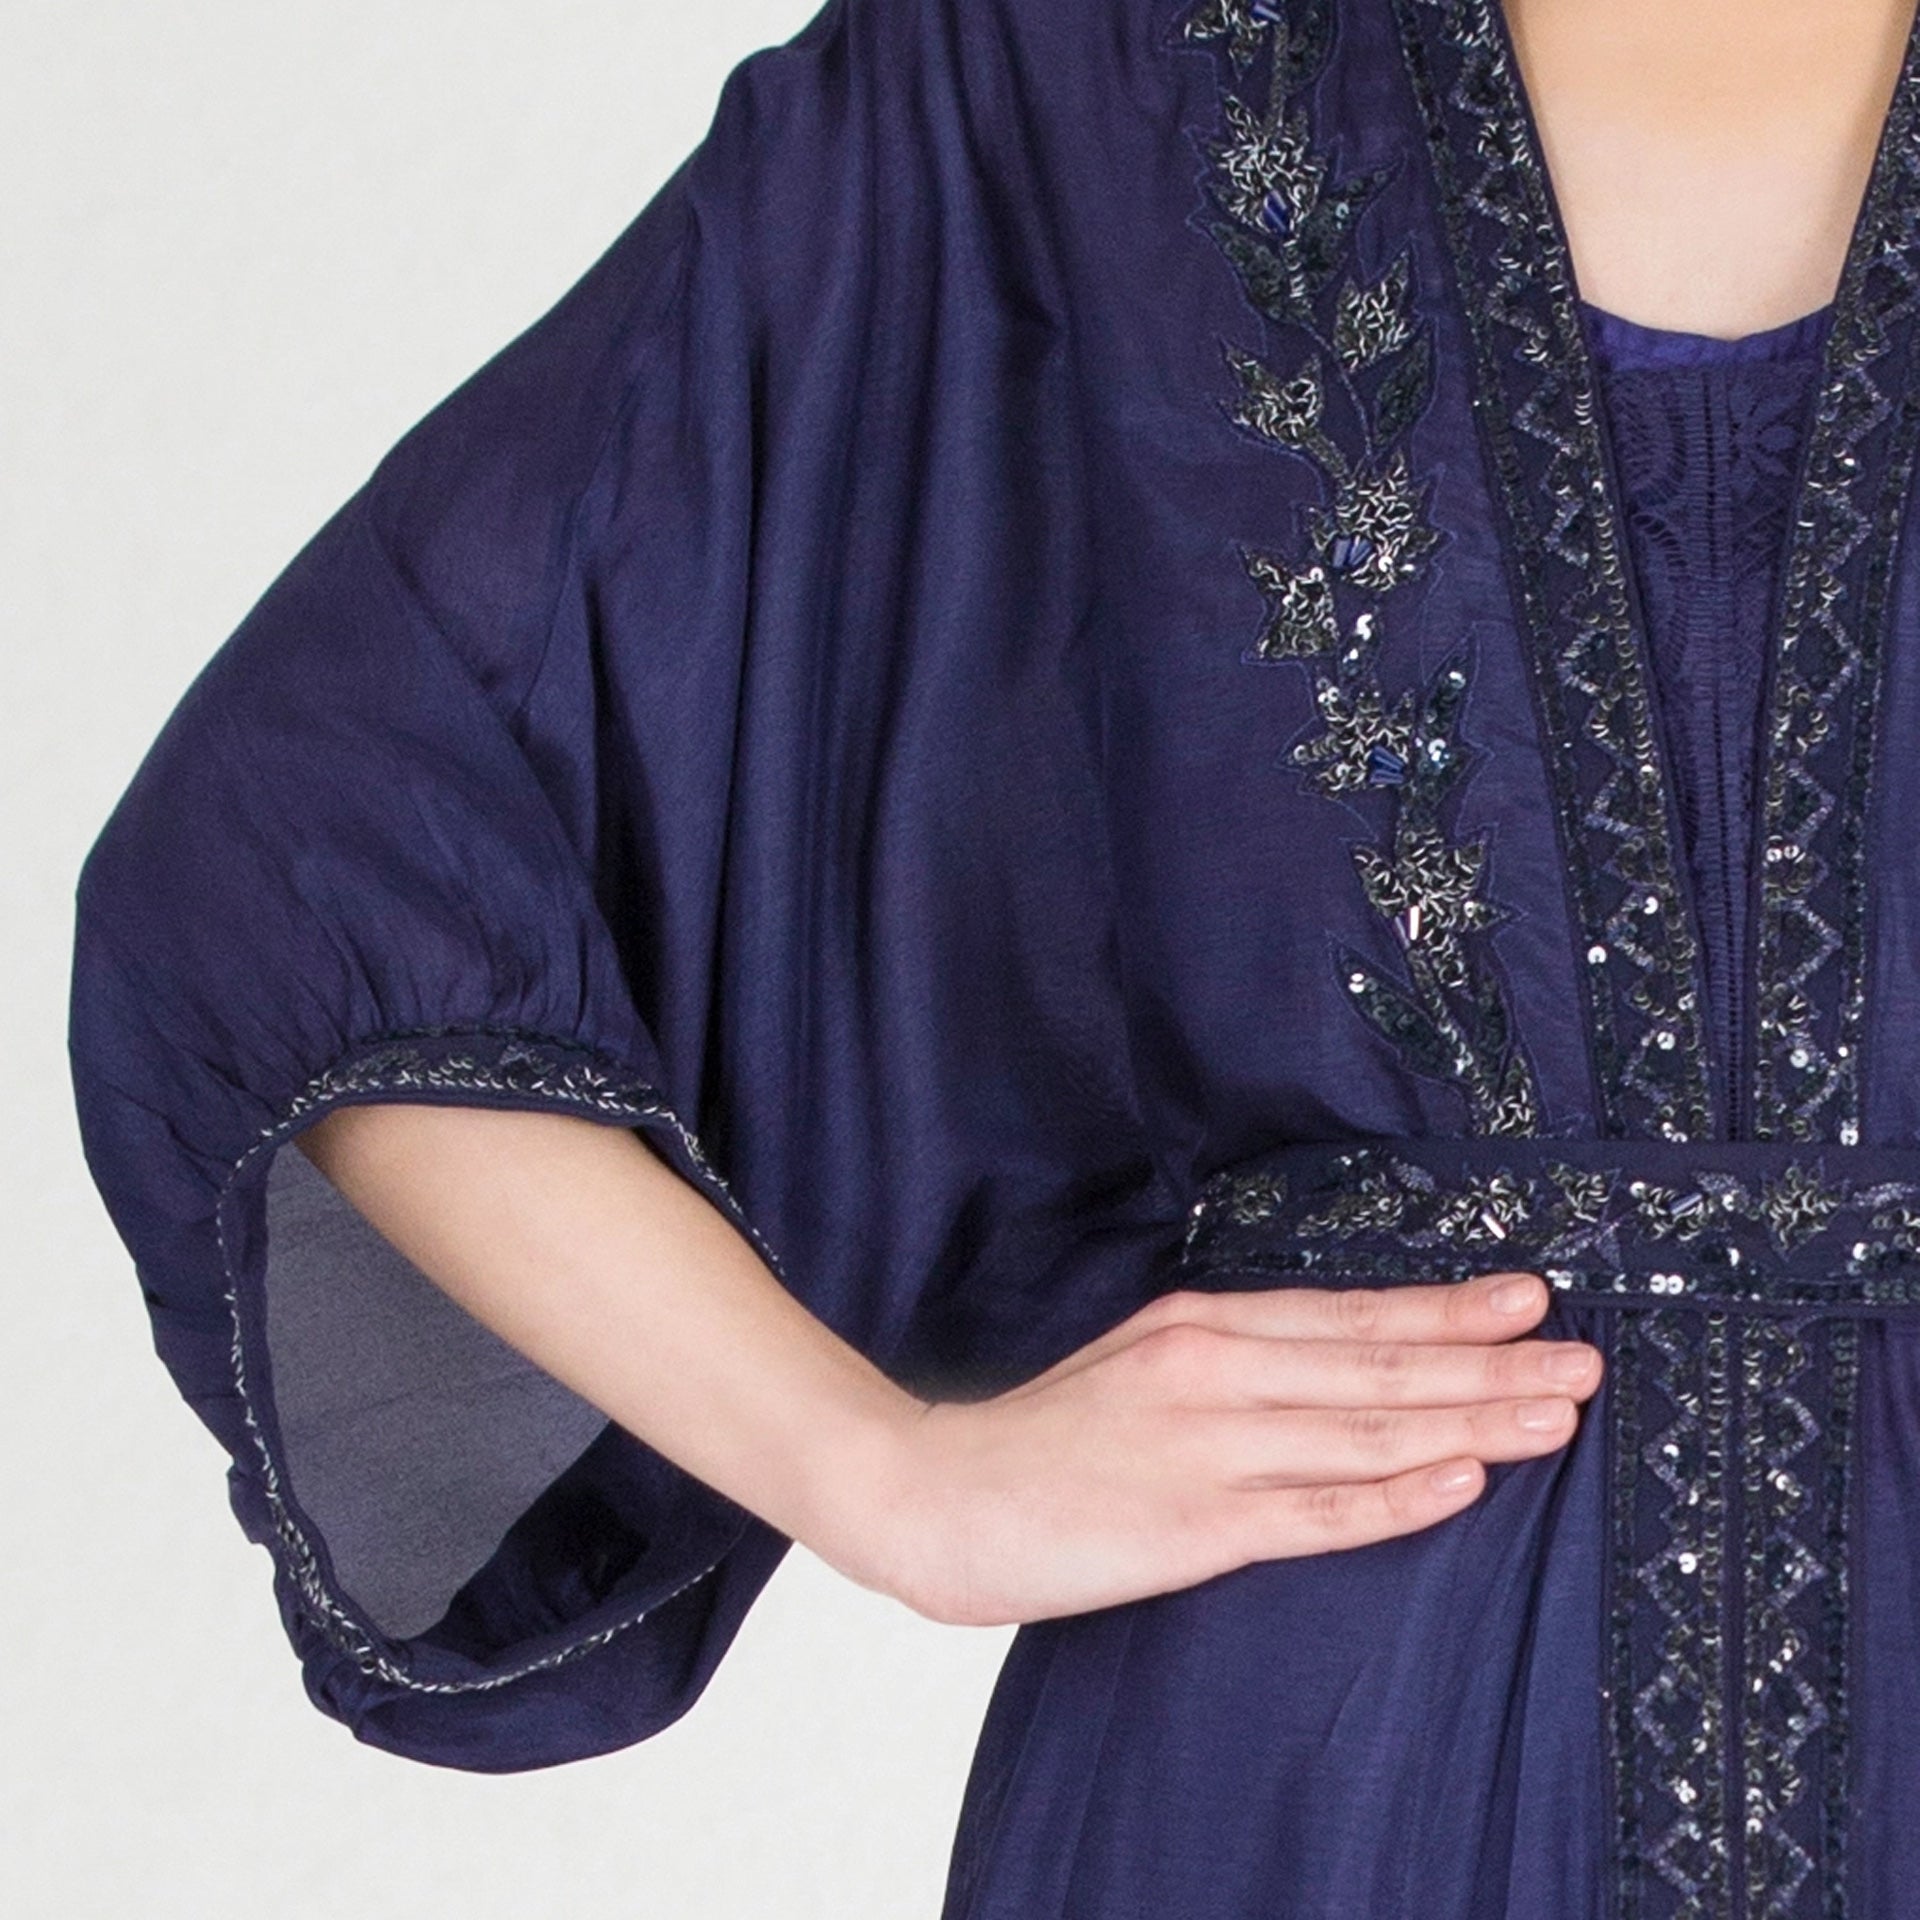 Blue Embroidery Dress with Long Sleeves From Shalky